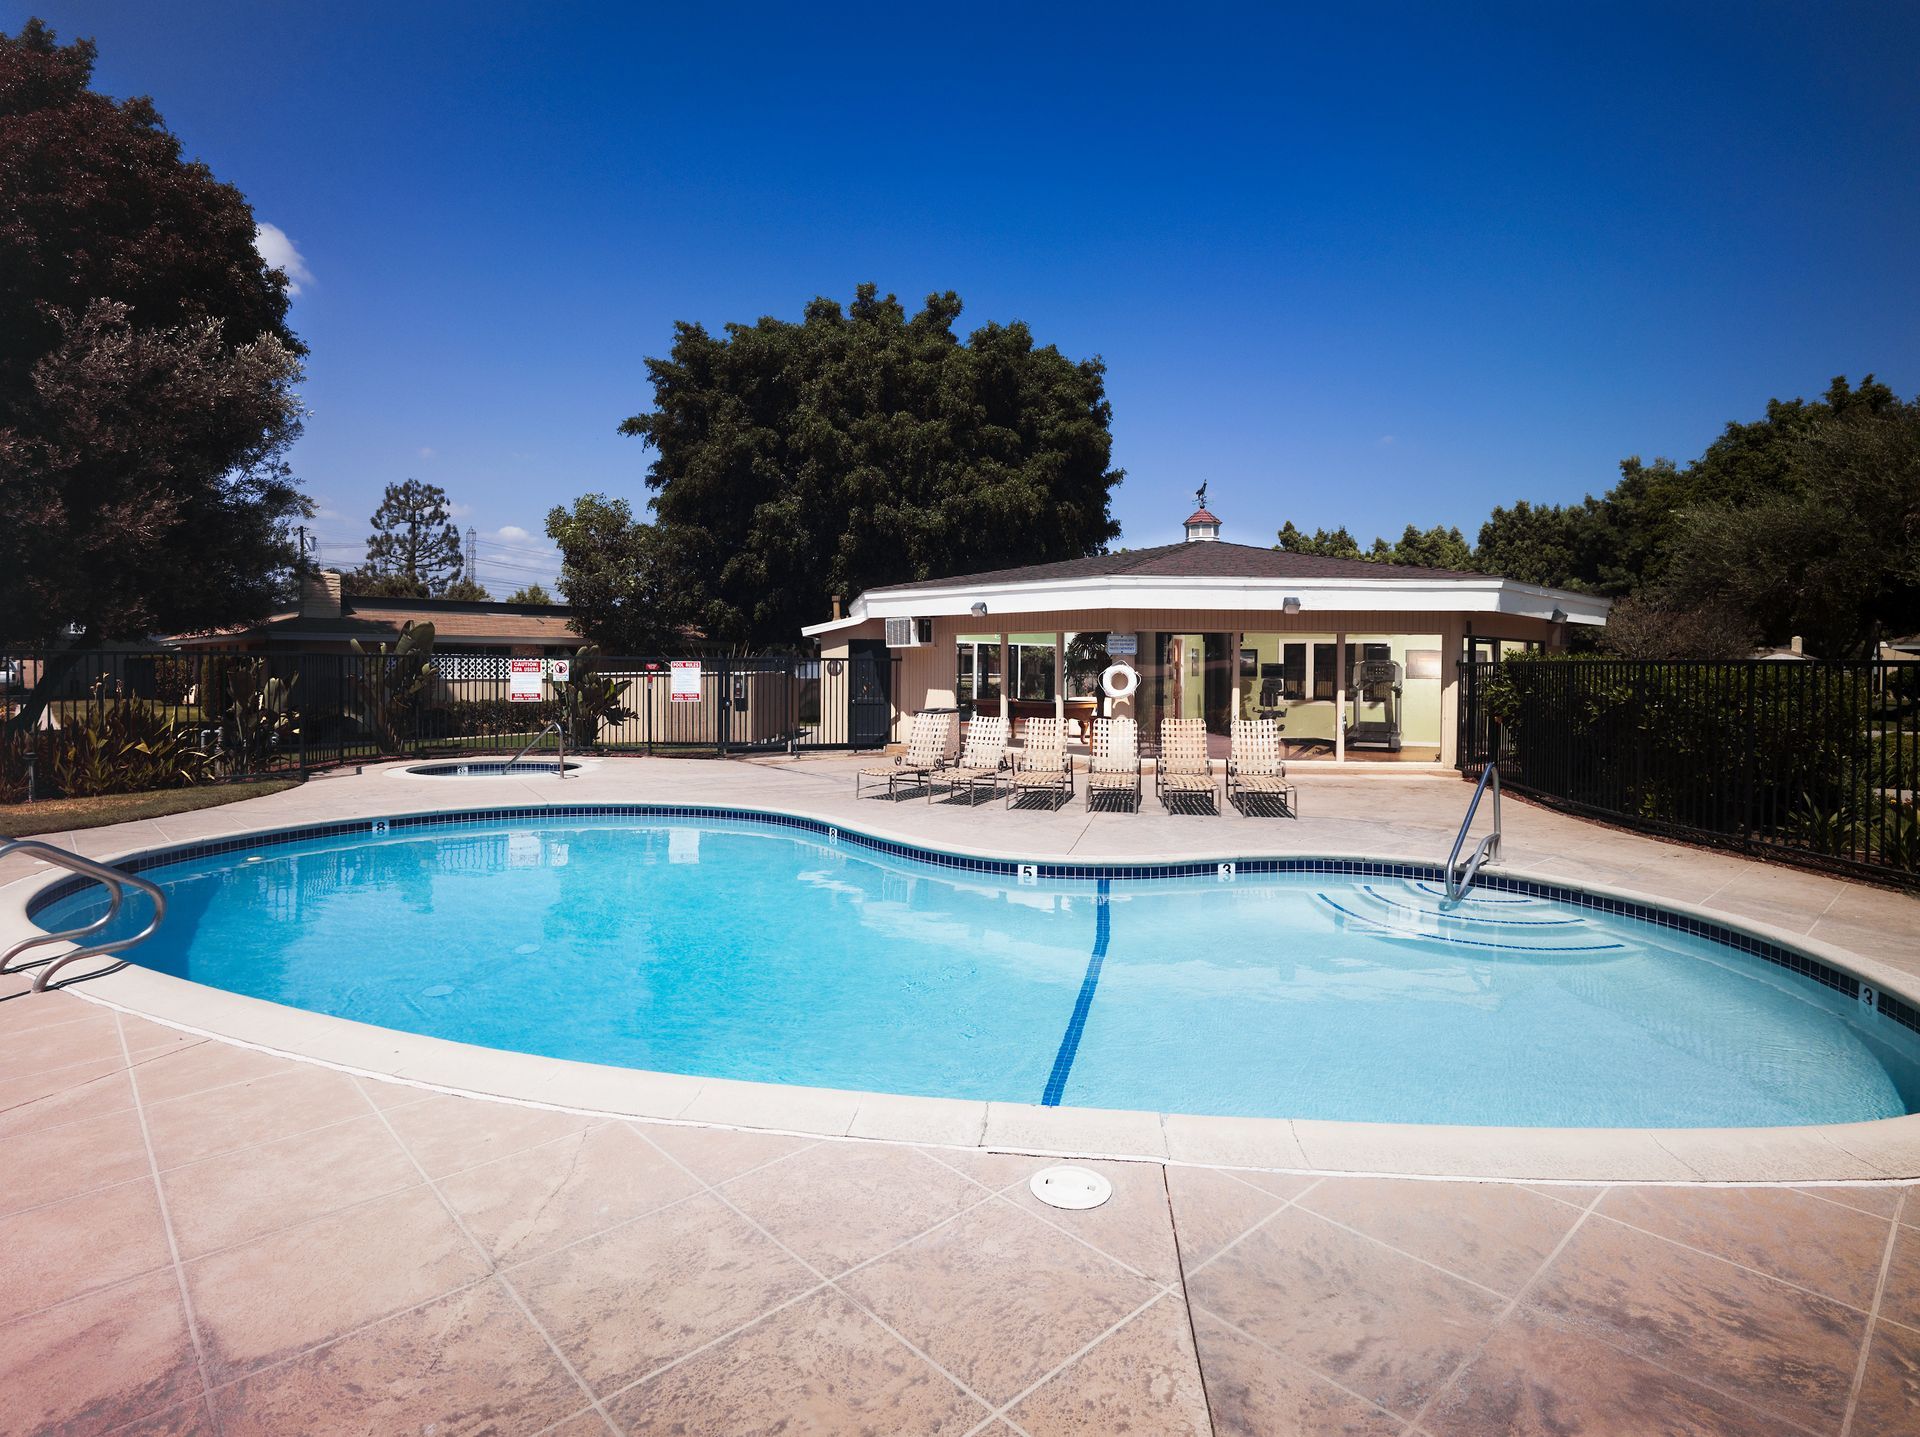 The Grove House community pool and patio